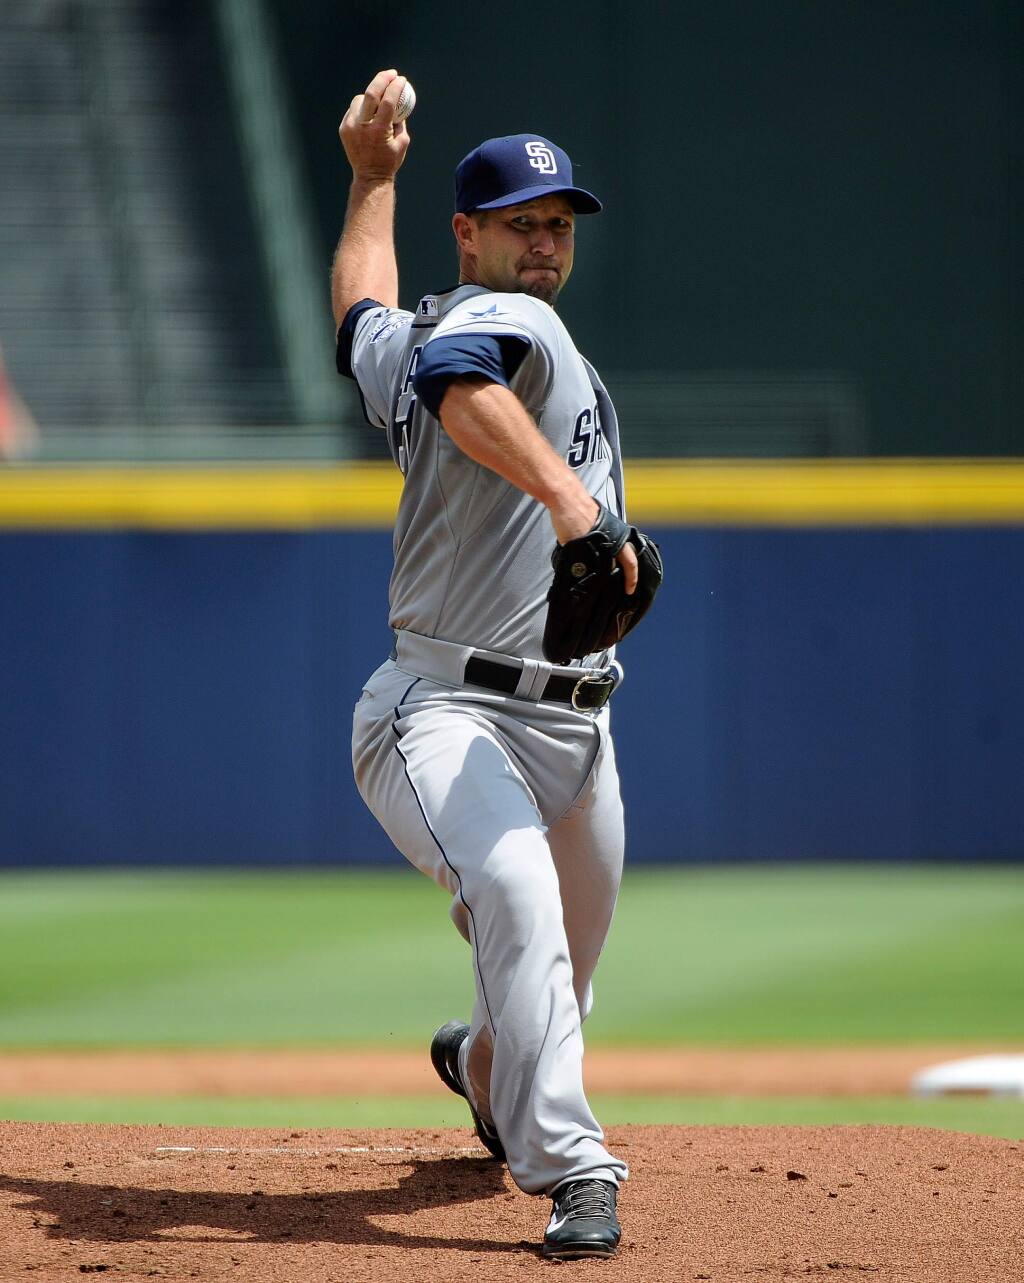 San Diego Padres' Jason Lane delivers to the Atlanta Braves in his first outing as a Padres starting pitcher during the first inning of a baseball game Monday, July 28, 2014, in Atlanta. (AP Photo/David Tulis)